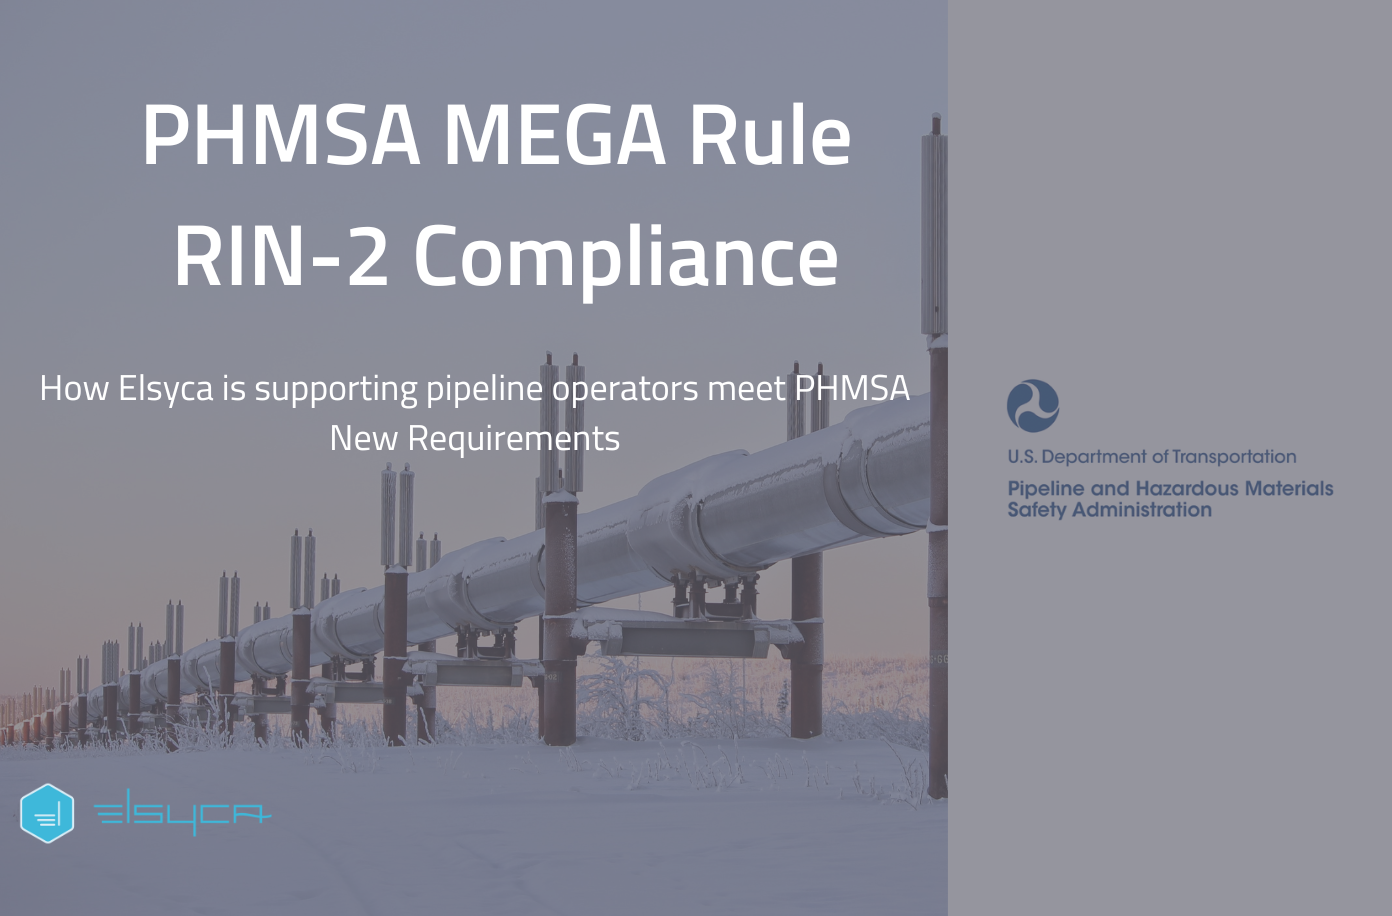 Enhancing Pipeline Safety and Compliance